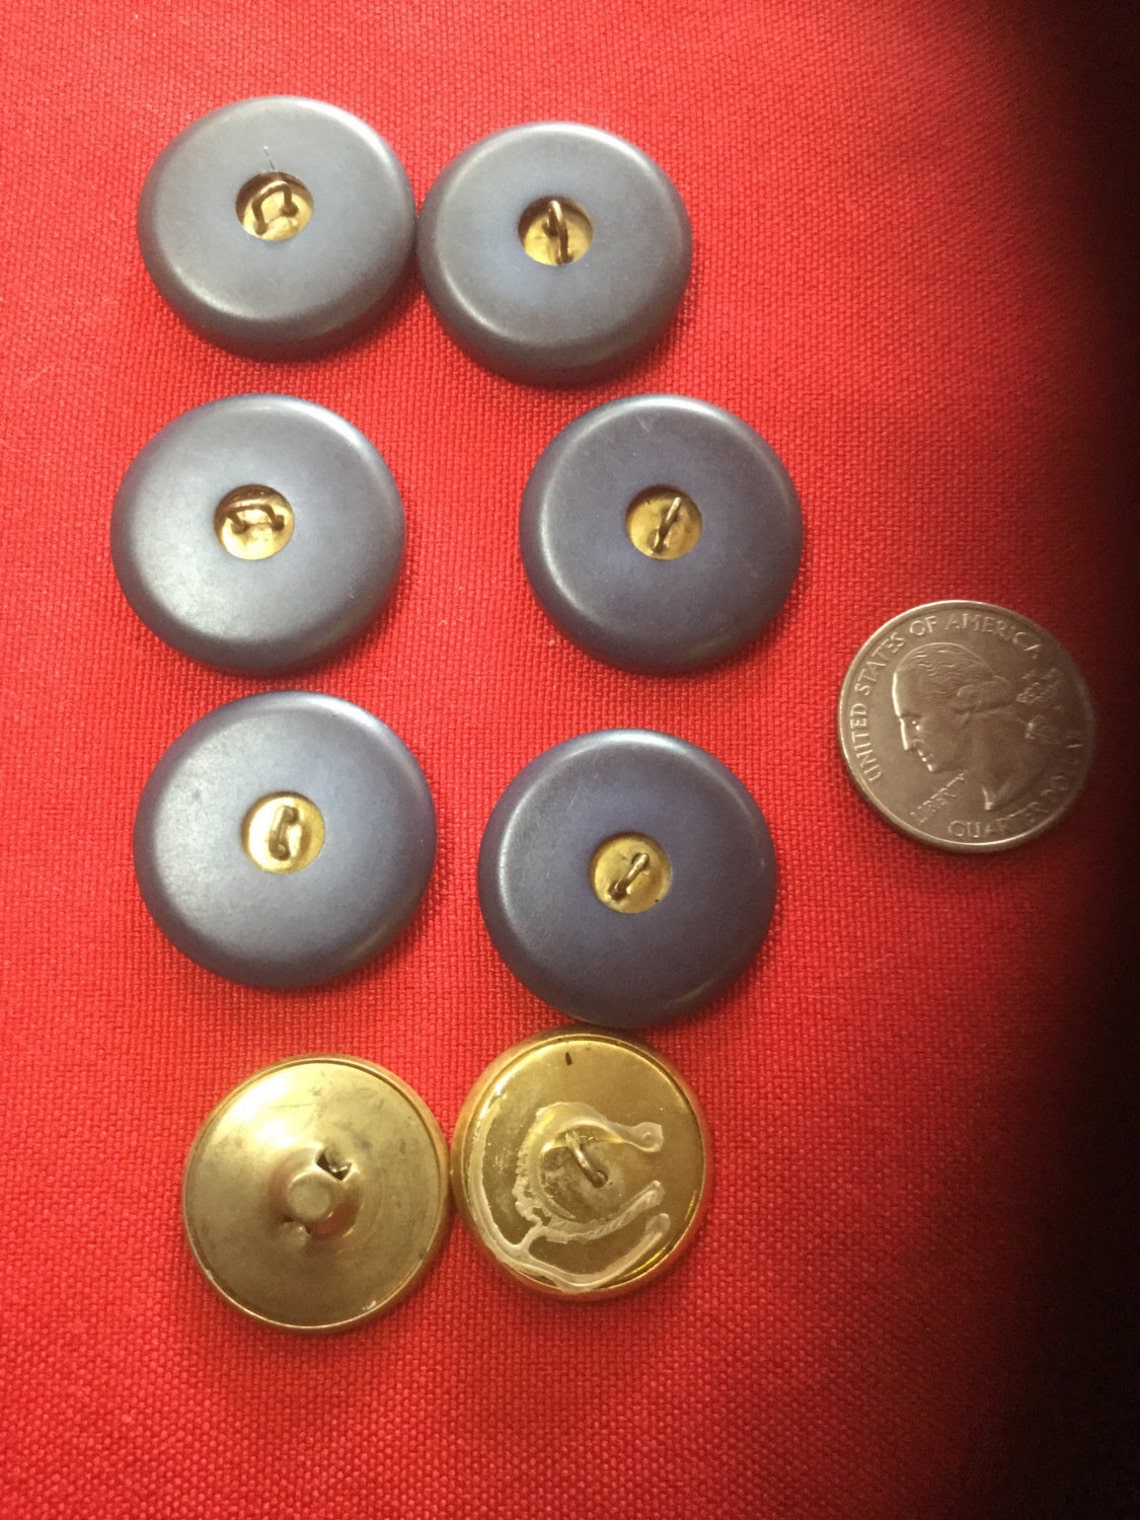 Vintage Metal and Plastic Buttons - Etsy